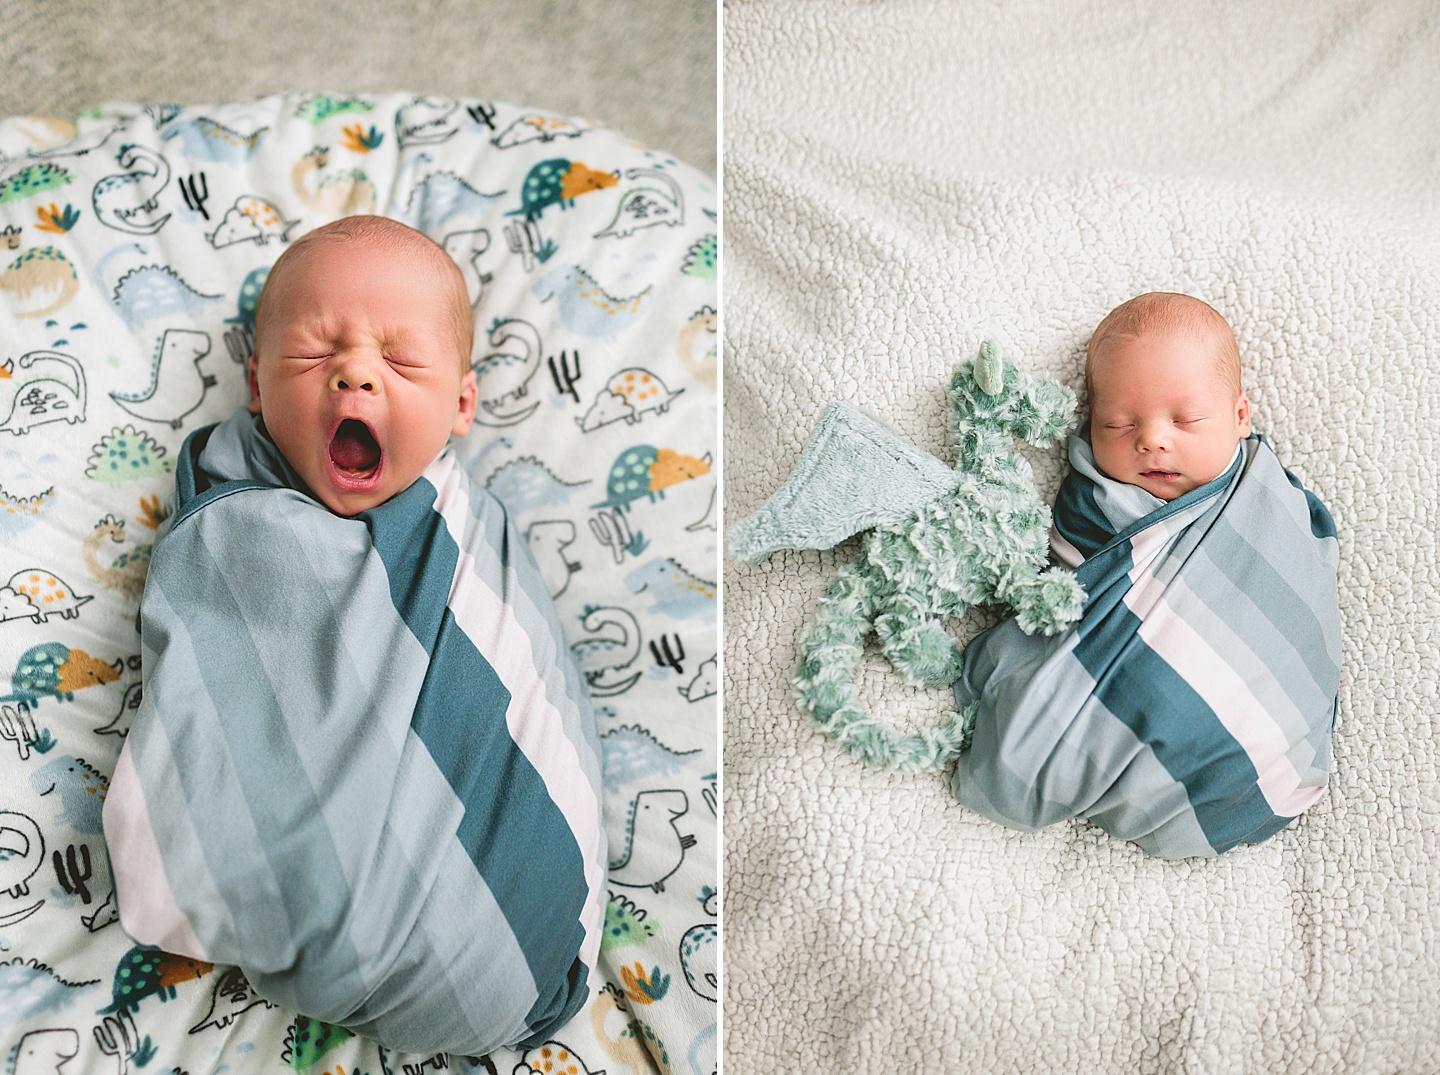 Simple newborn baby photos with dragon toy